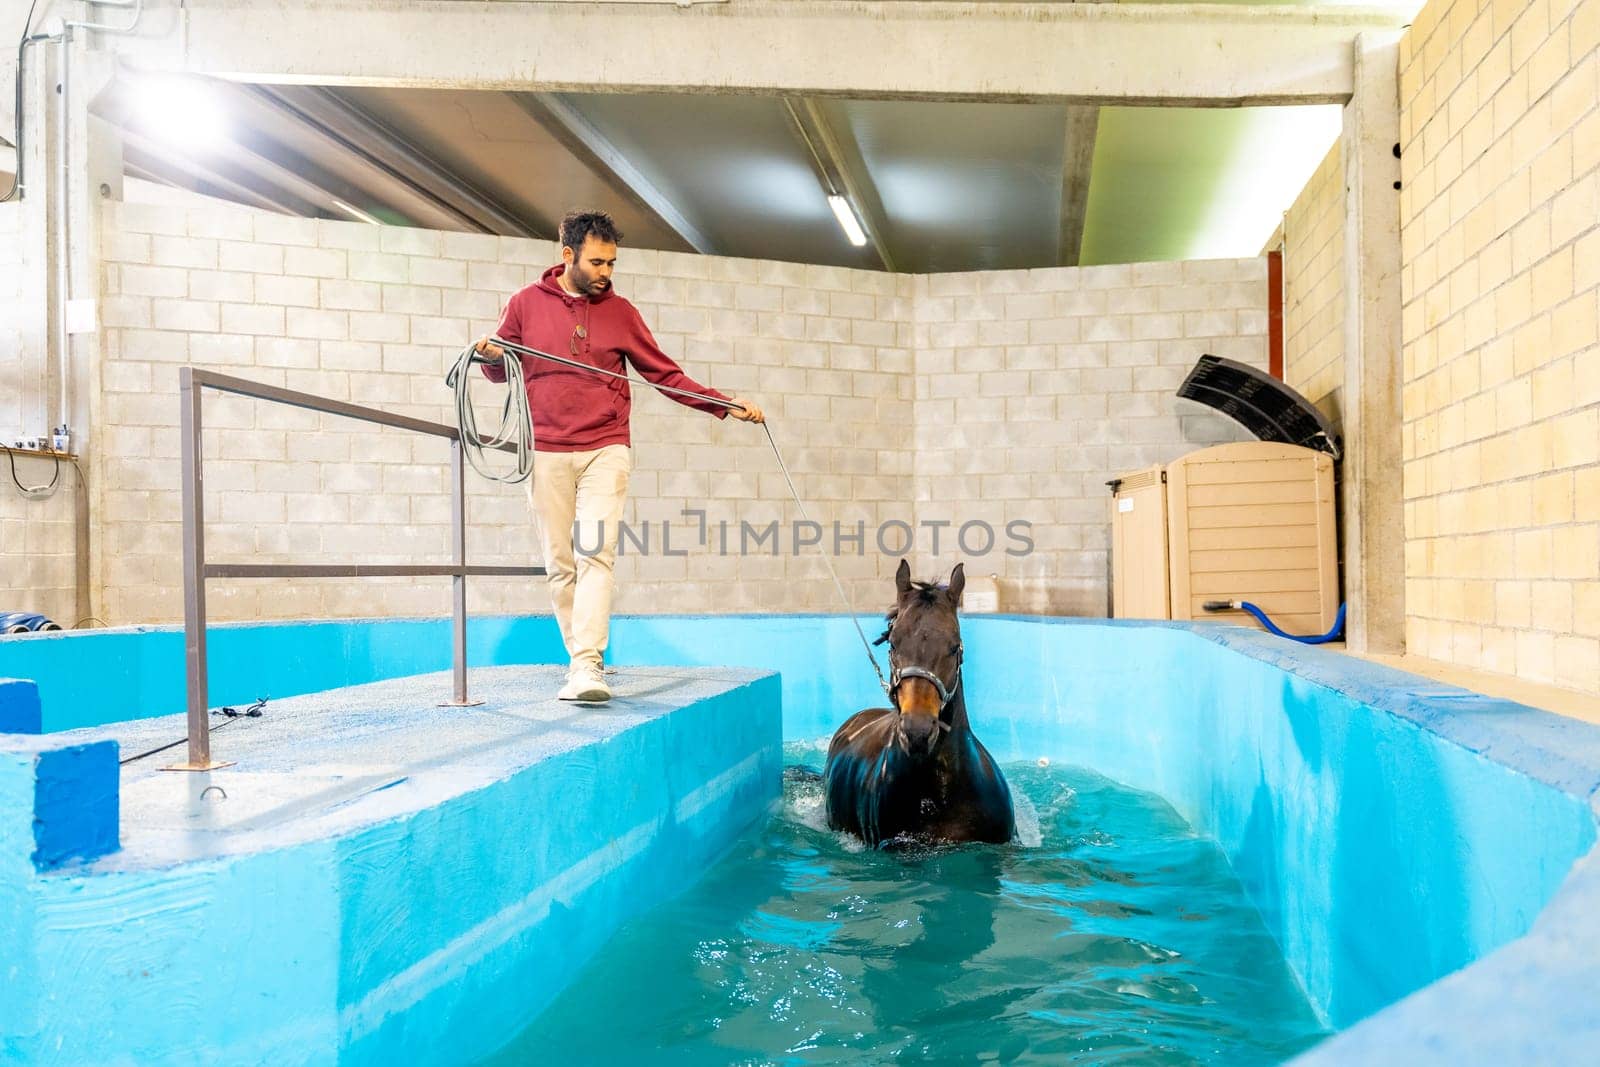 Veterinary holding a horse inside a pool during rehabilitation session by Huizi